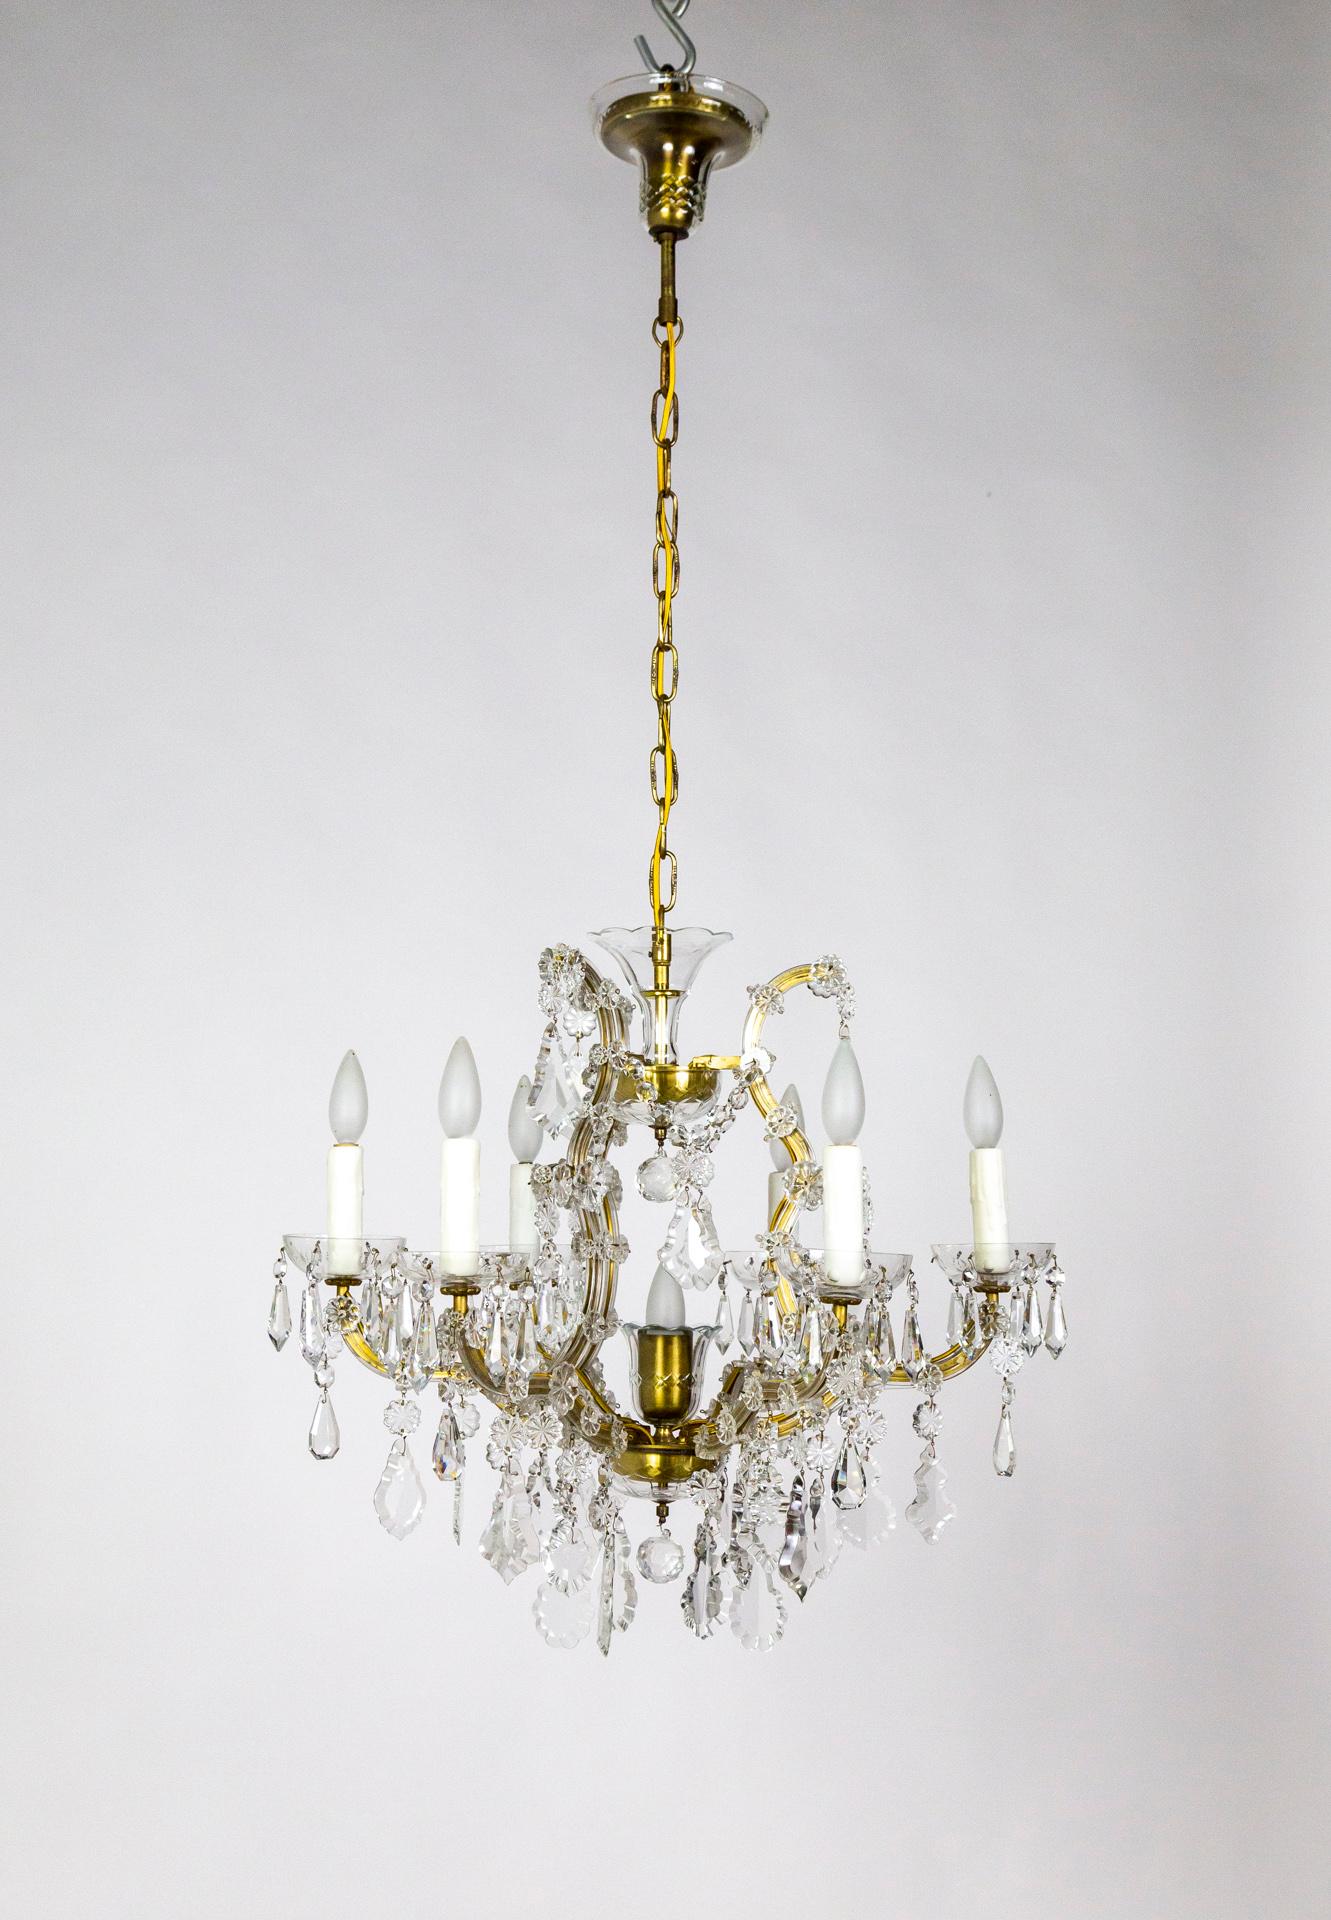 A six-arm, brass and glass chandelier in the Maria Theresa style from the mid-20th century with many large, dangling crystals. It has a center light with a brass socket cover and glass bobeche, echoed in the glass-cupped brass canopy, and six